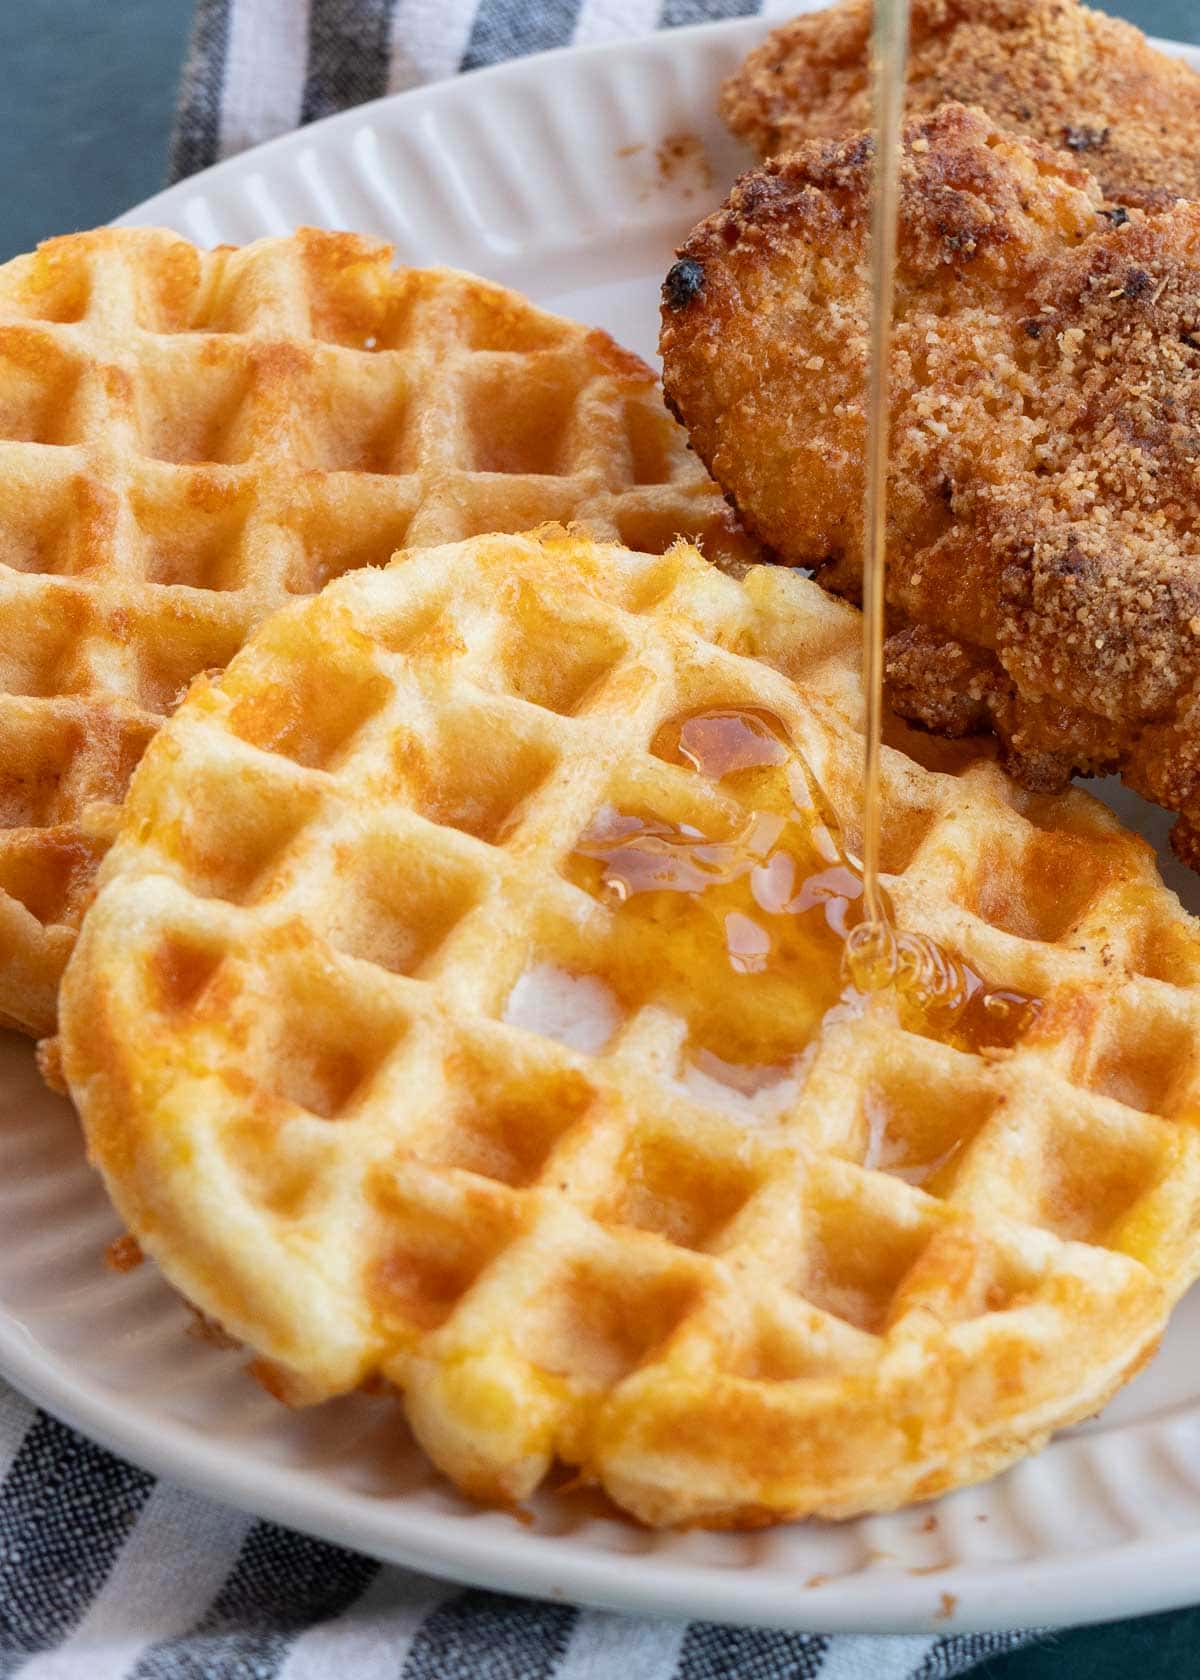 chaffles with syrup and fried chicken on a plate